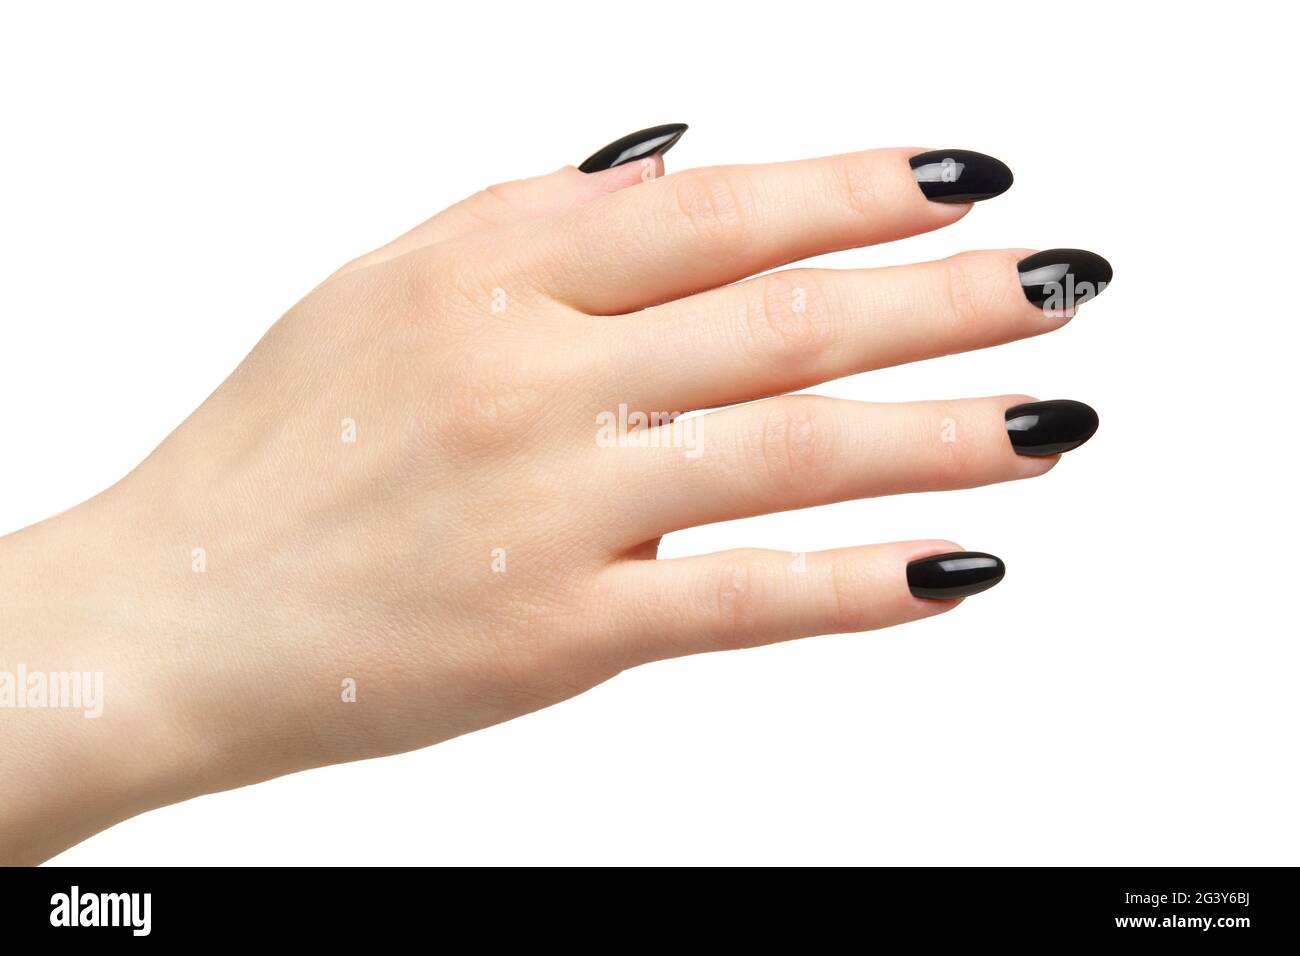 Woman's hands with long nails and black manicure with bottles of nail polish  Stock Photo - Alamy